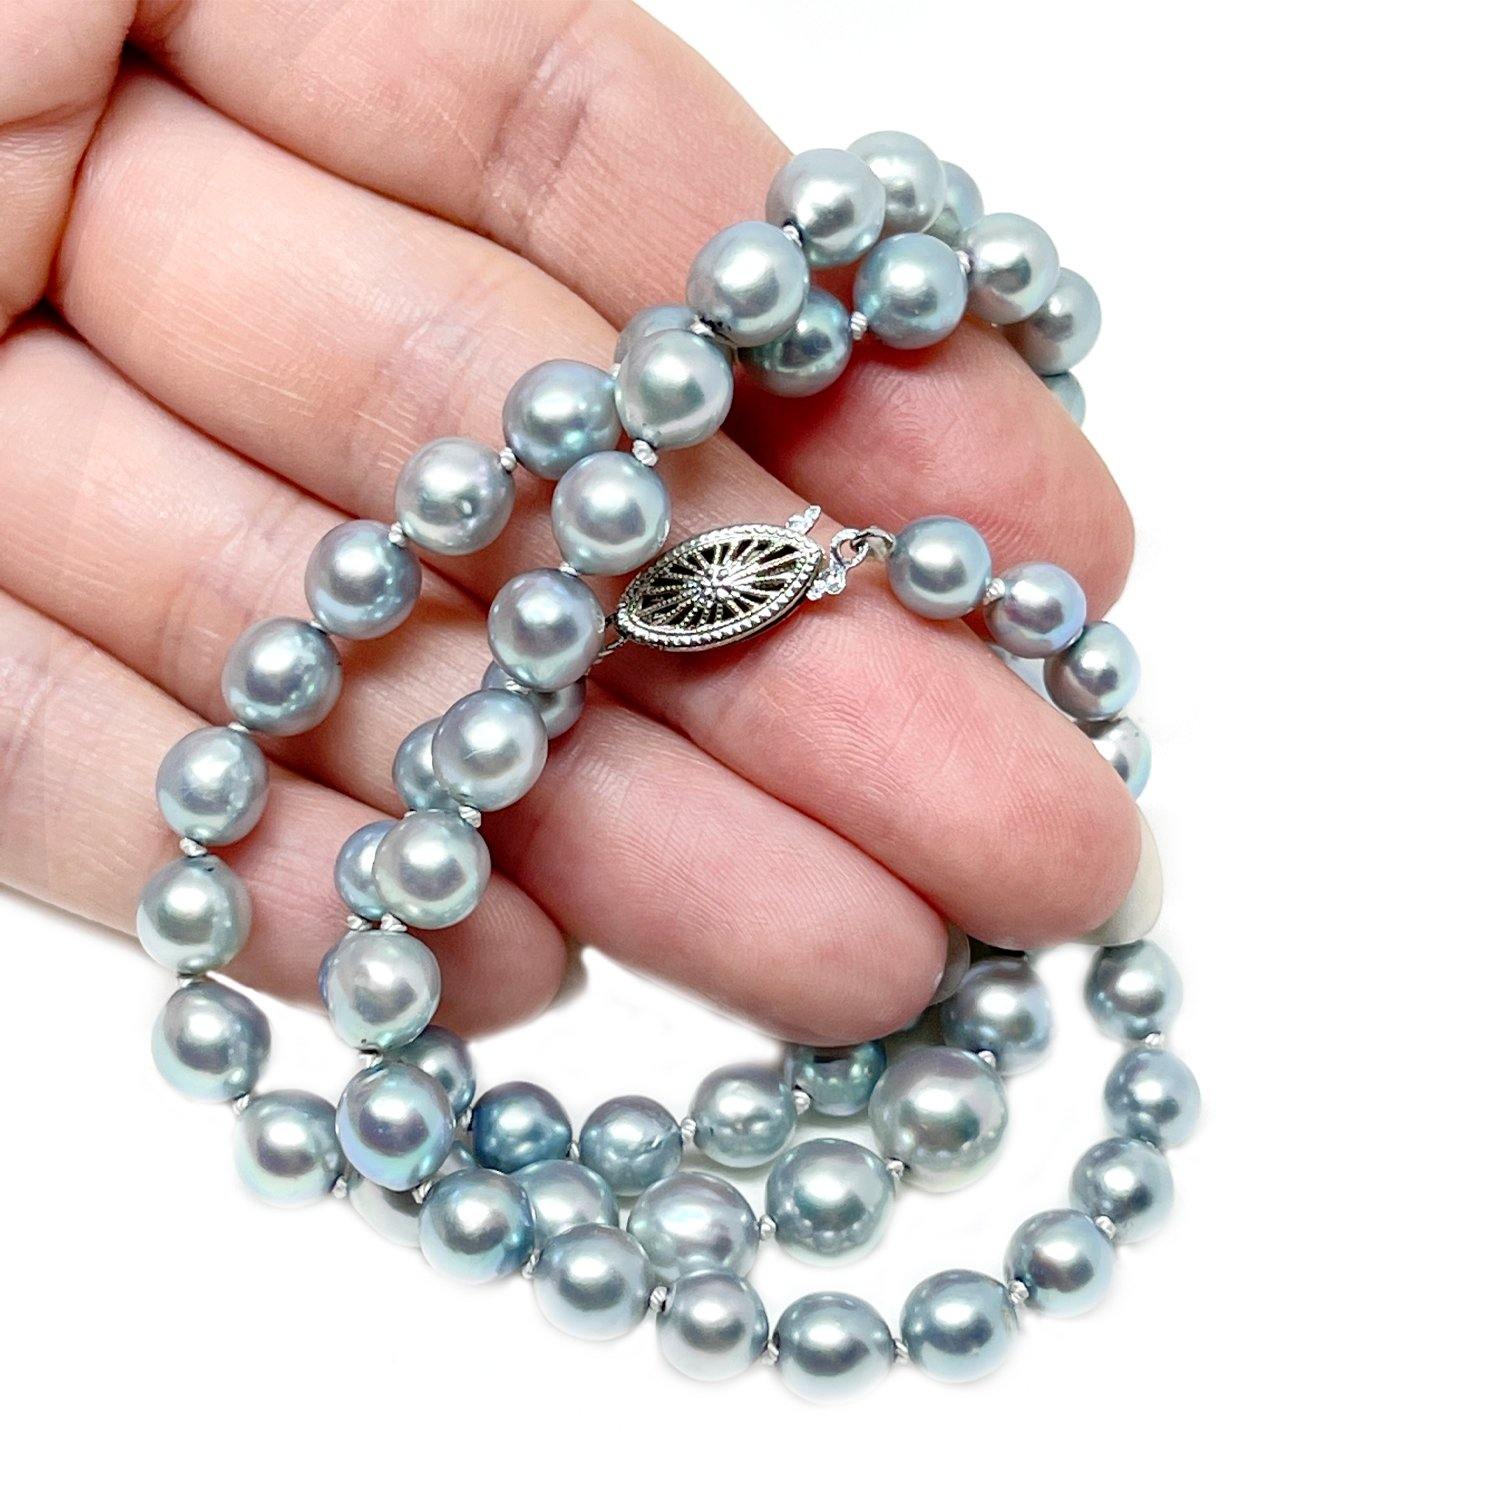 Blue Japanese Cultured Akoya Pearl Graduated Necklace - 10K White Gold 21 Inch